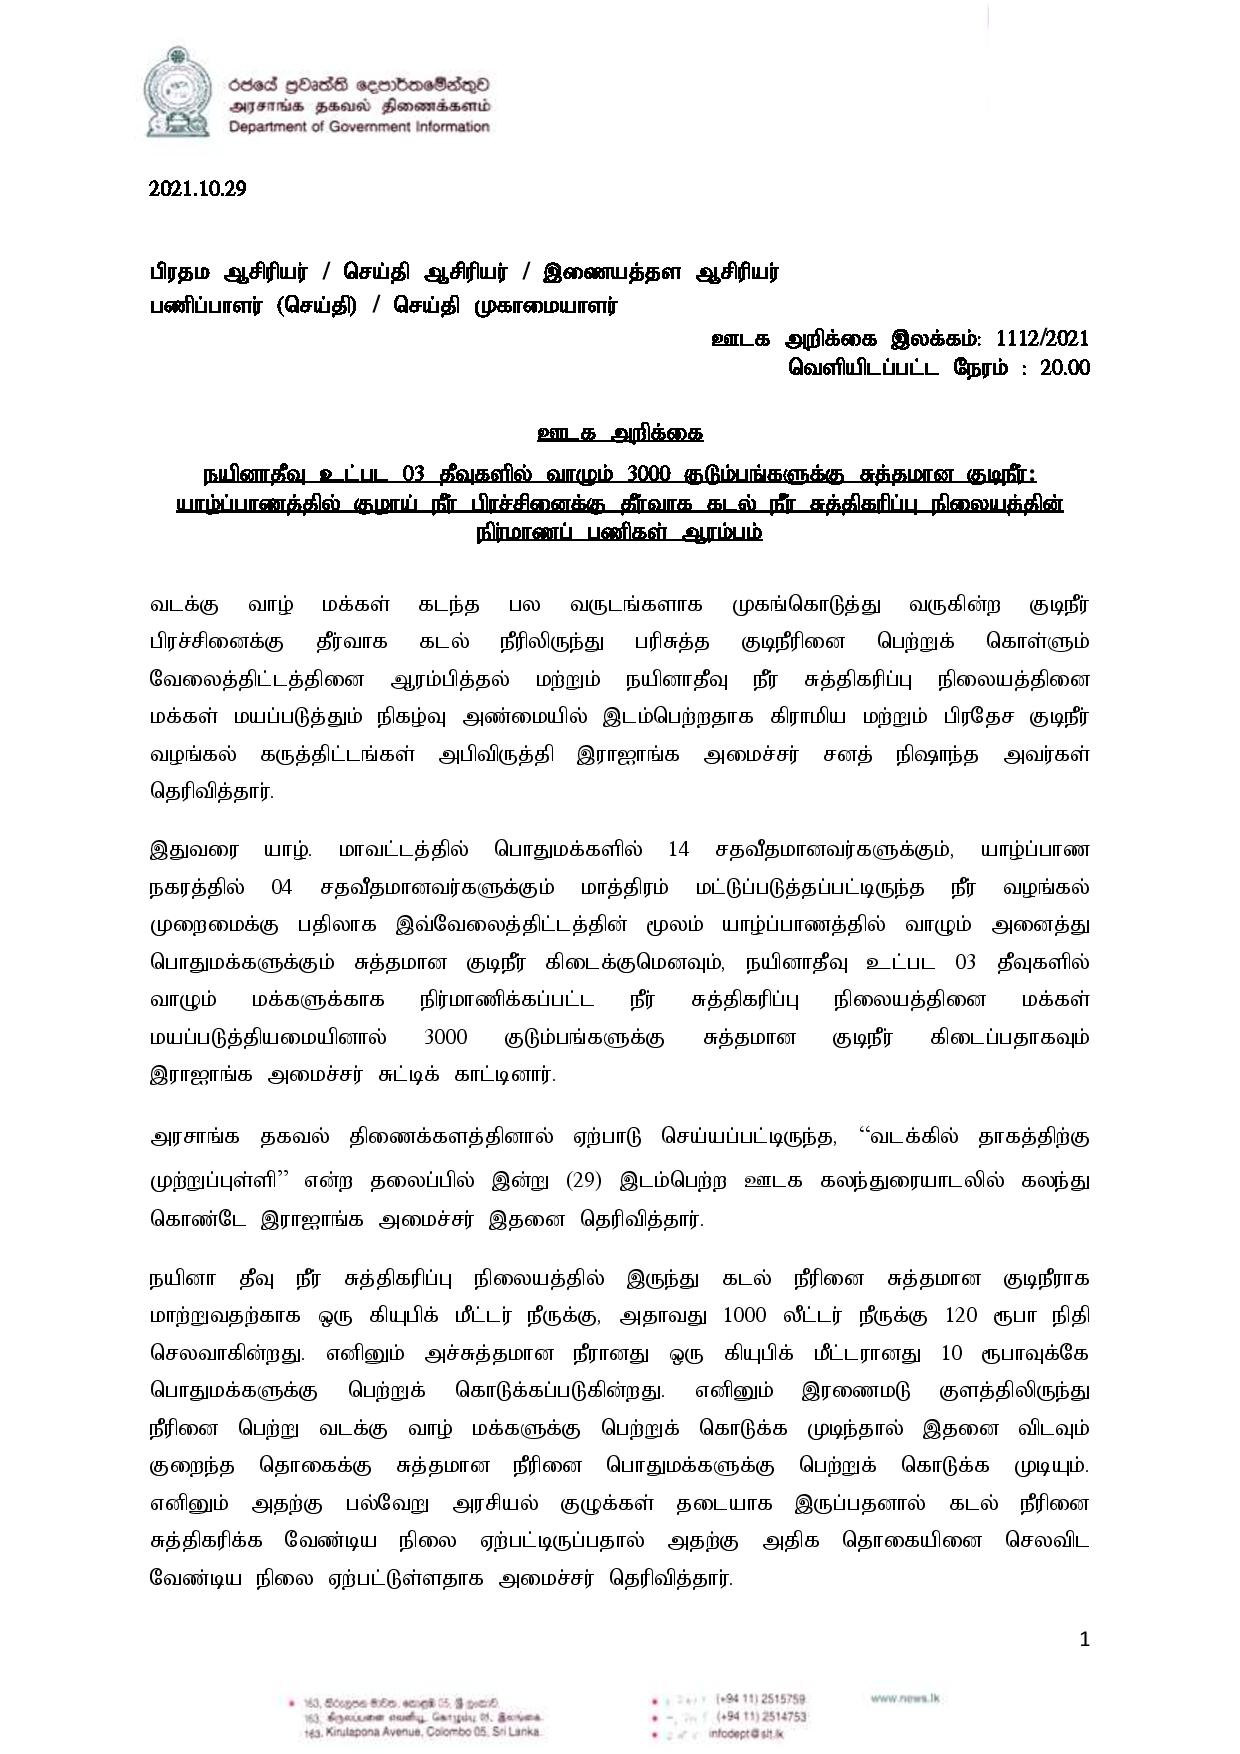 Press Release 1112 Tamil page 001